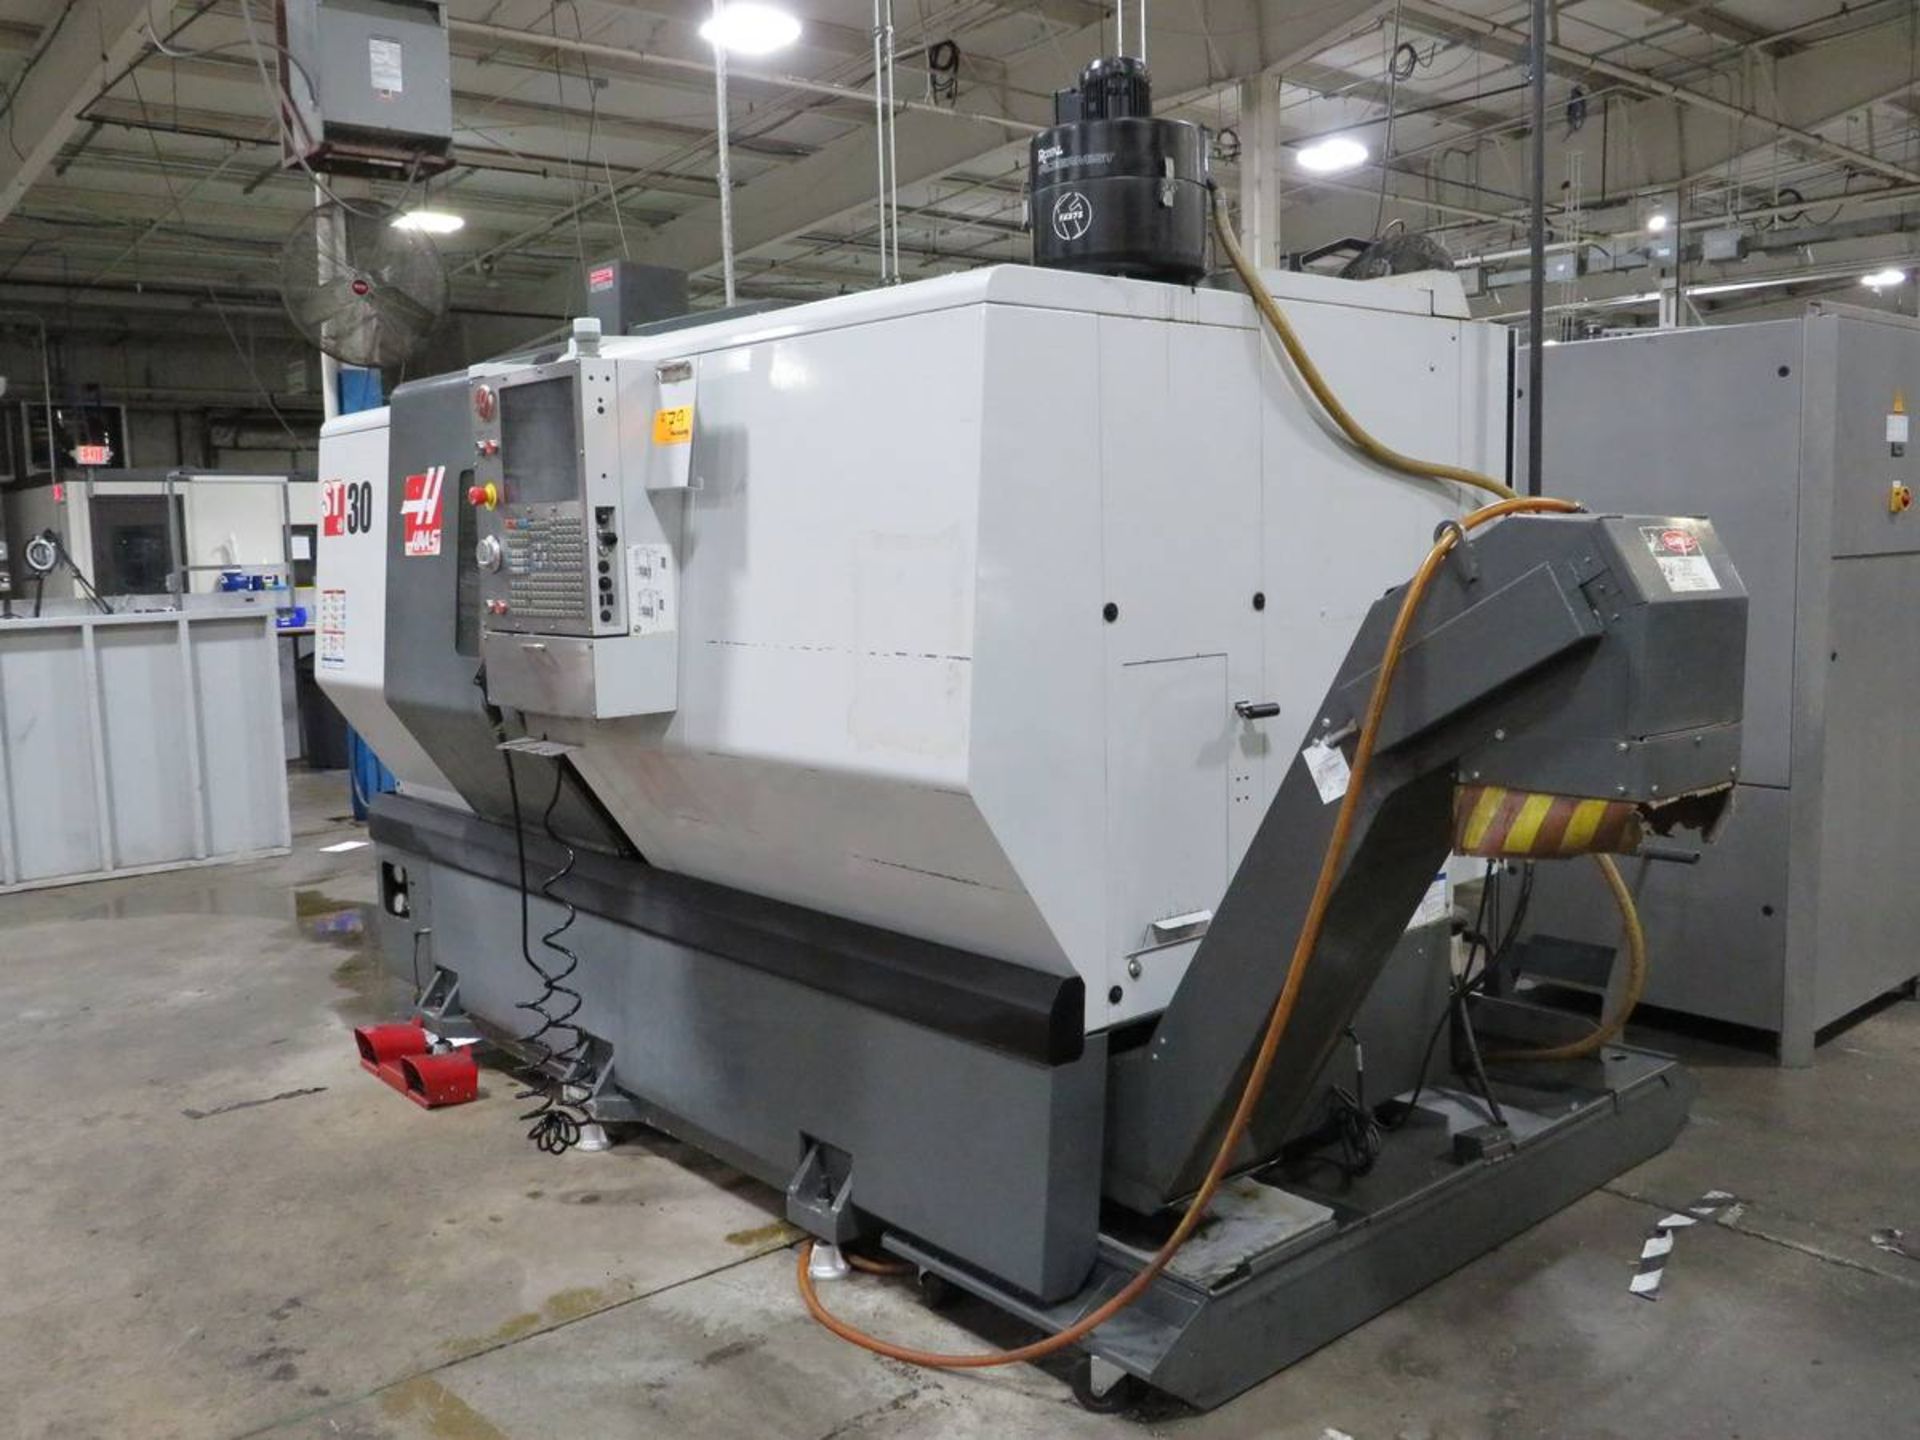 2013 Haas ST-30 CNC Turning Center - Image 4 of 10